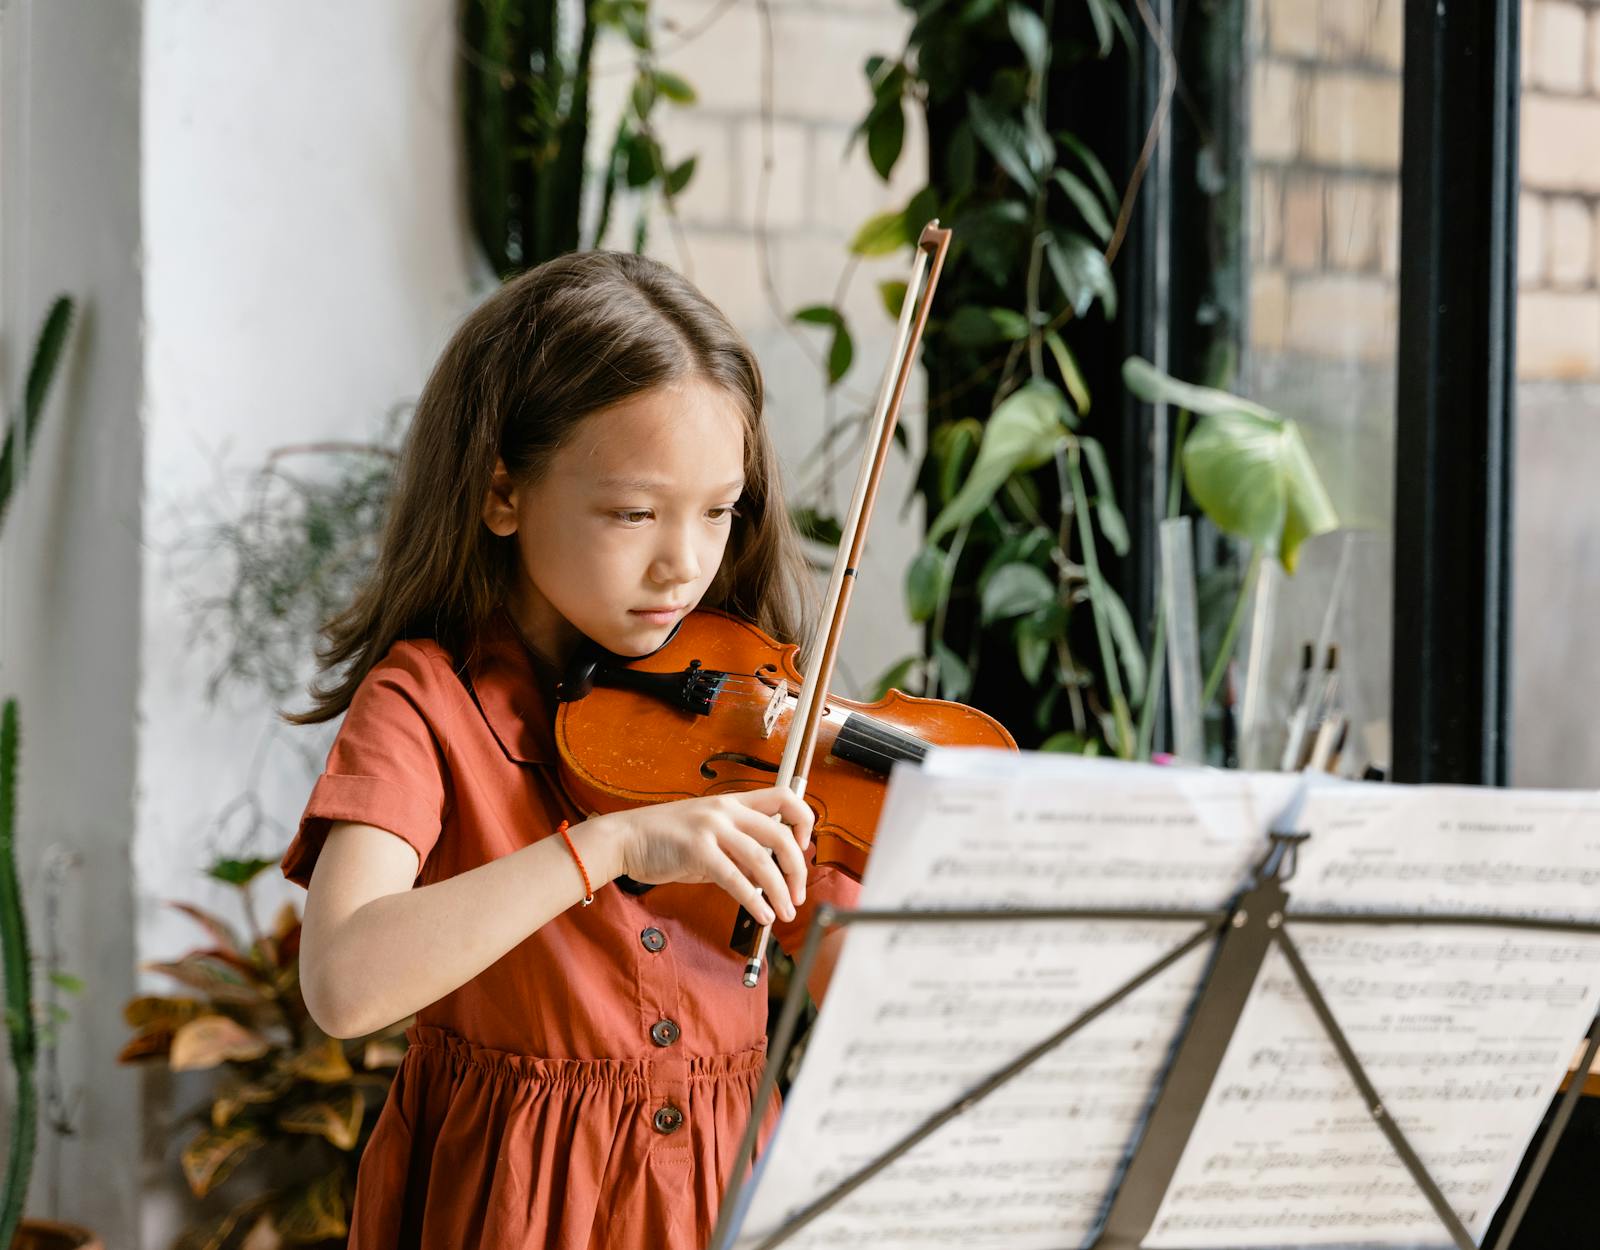 Kids love music when they choose their instrument